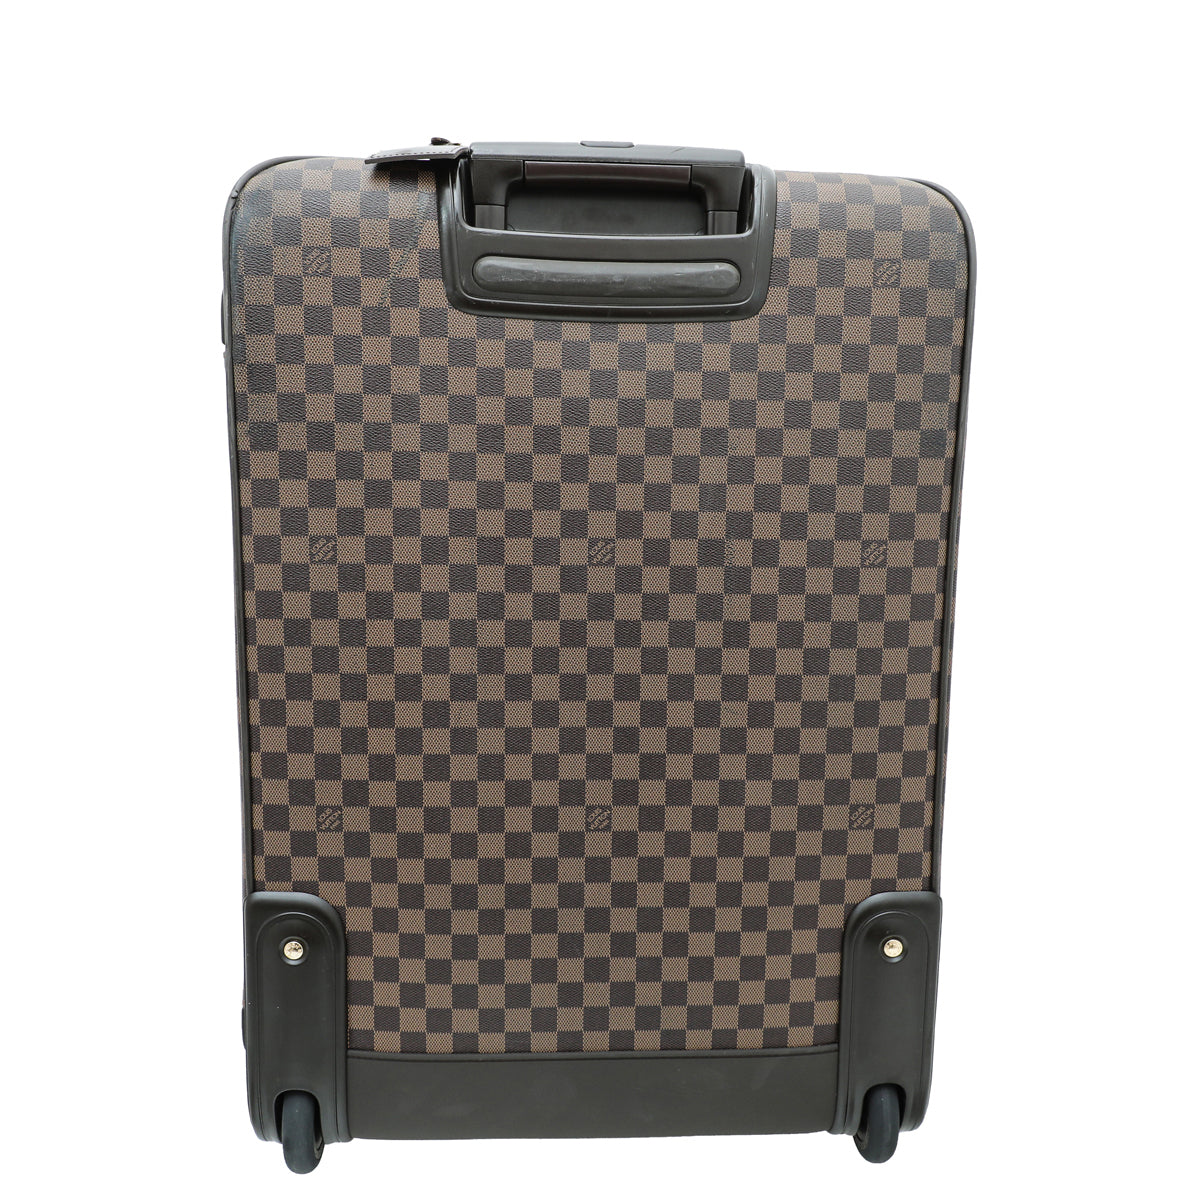 The Louis Vuitton Keepall 55 Is the Investment Luggage I've Been Looking  For | Condé Nast Traveler